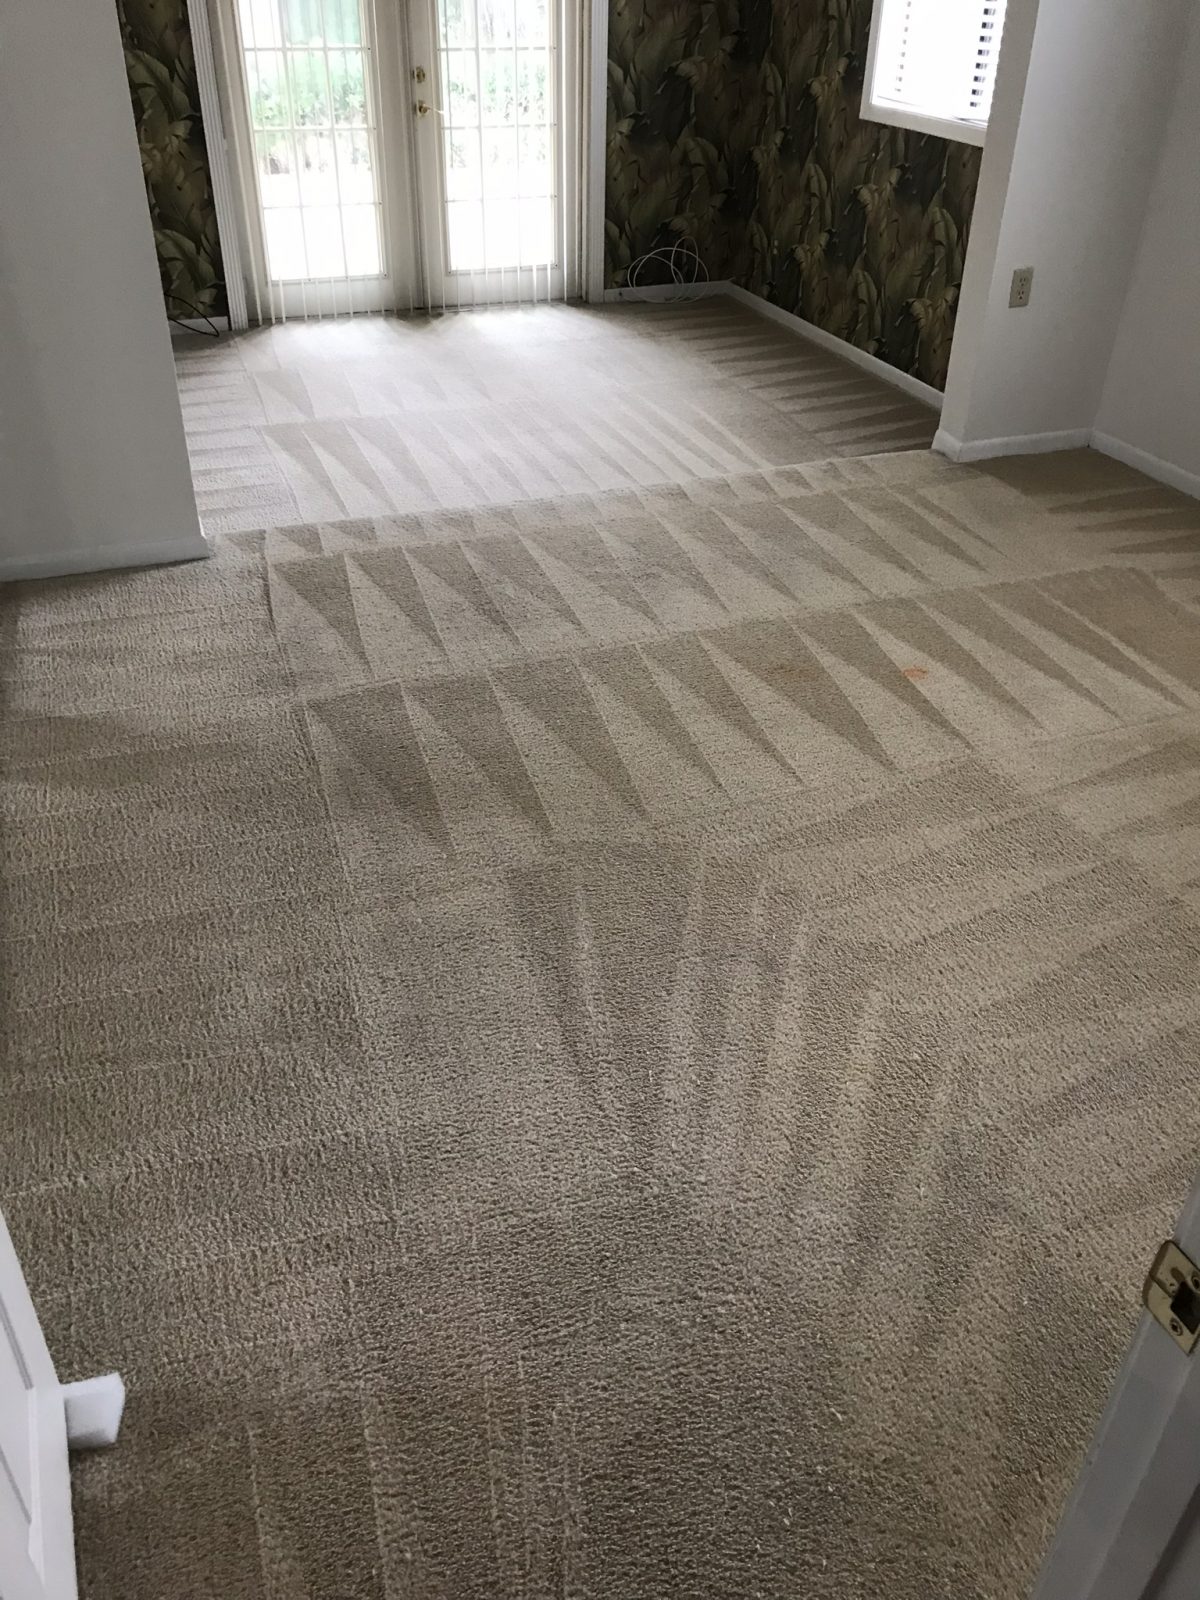 Professional Carpet Cleaning Odessa Florida by Howards Cleaning Service